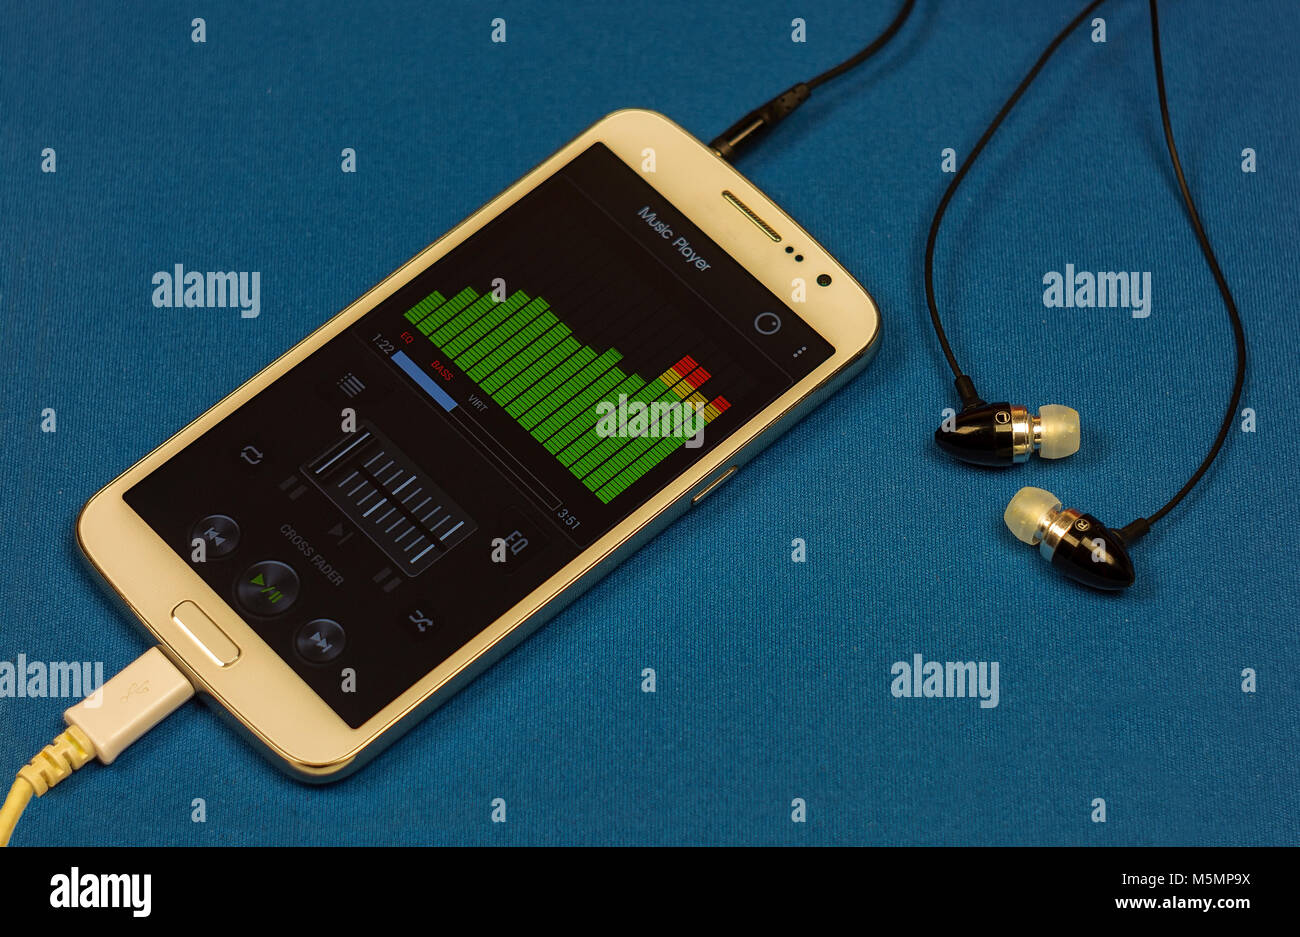 Music player equalizer on smartphone display with headphones, close-up, blue background Stock Photo